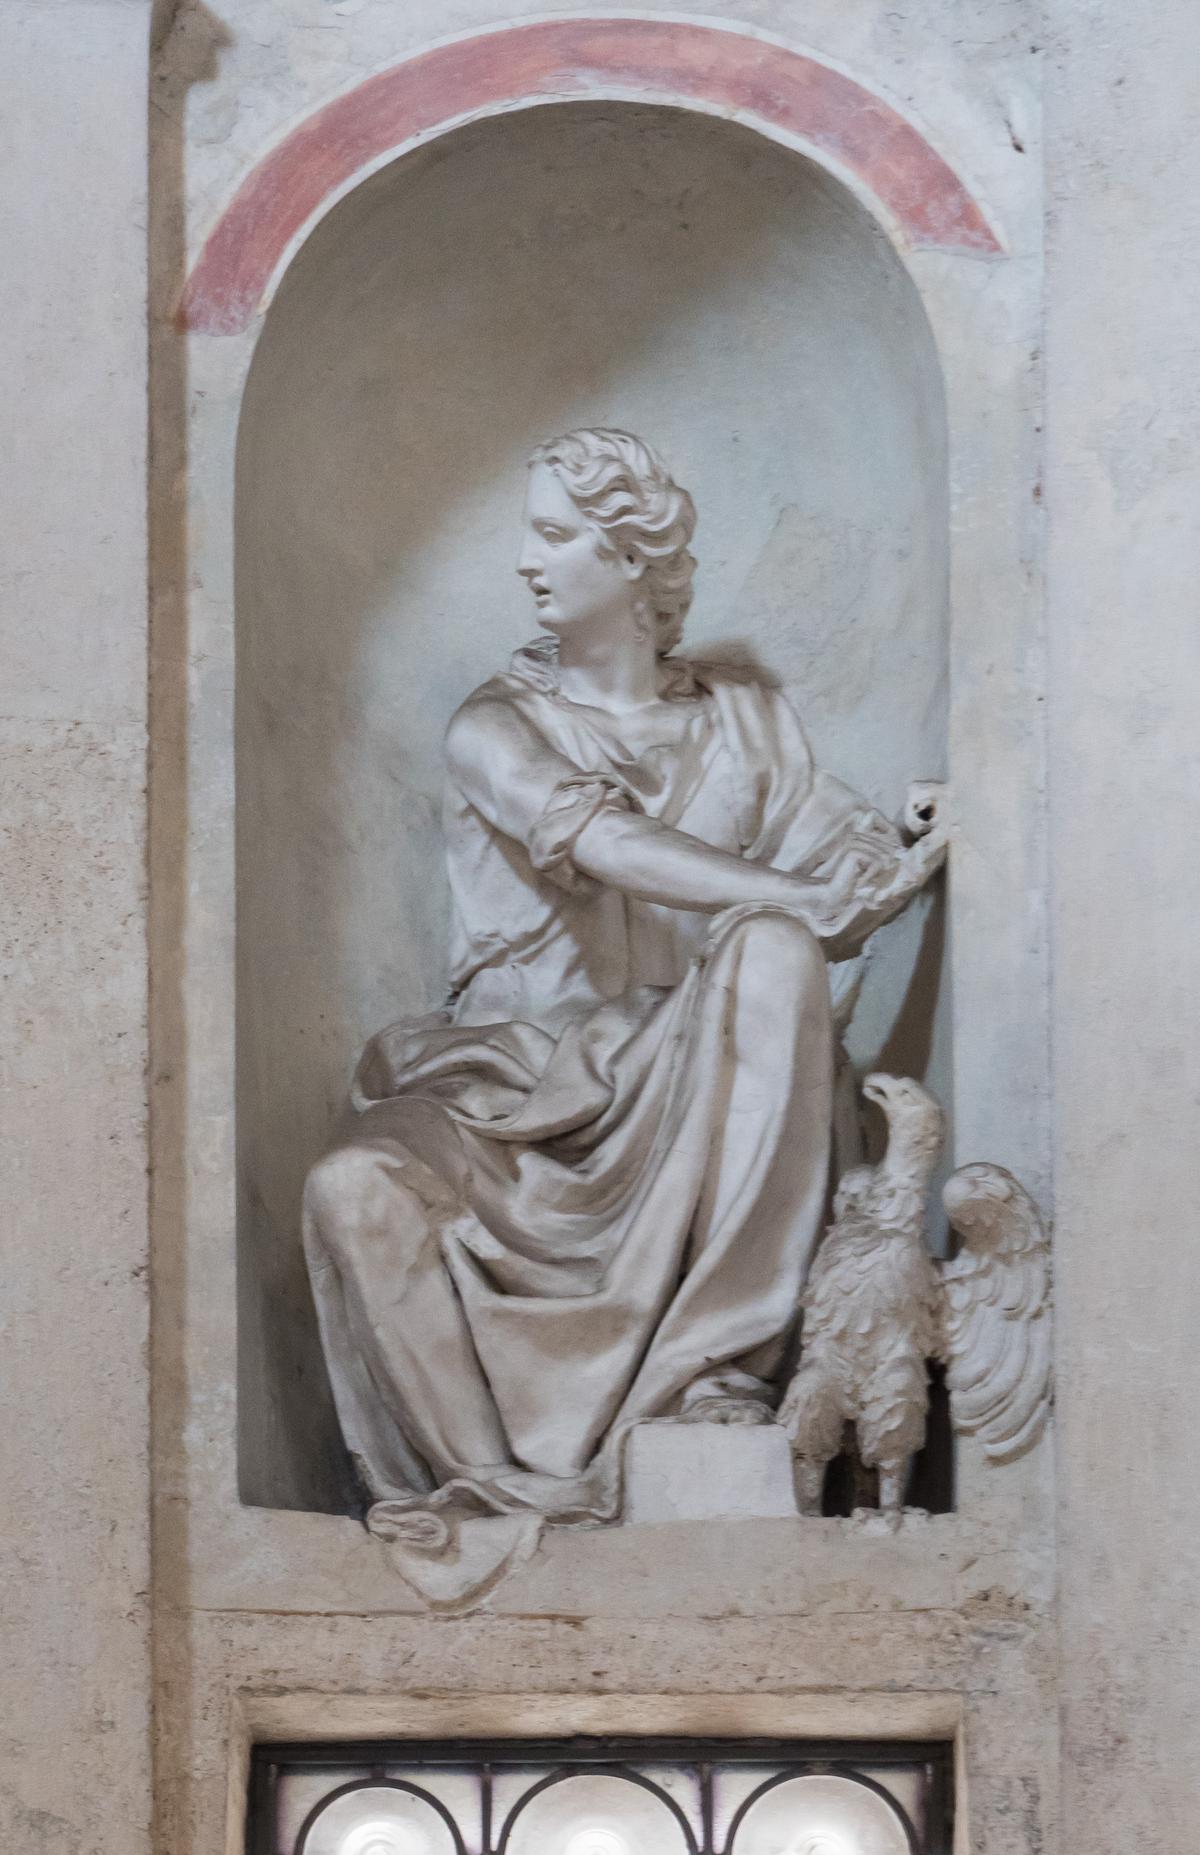 A statue of John the Evangelist in the Tempietto. (JTSH26/ CC SA-BY 4.0)